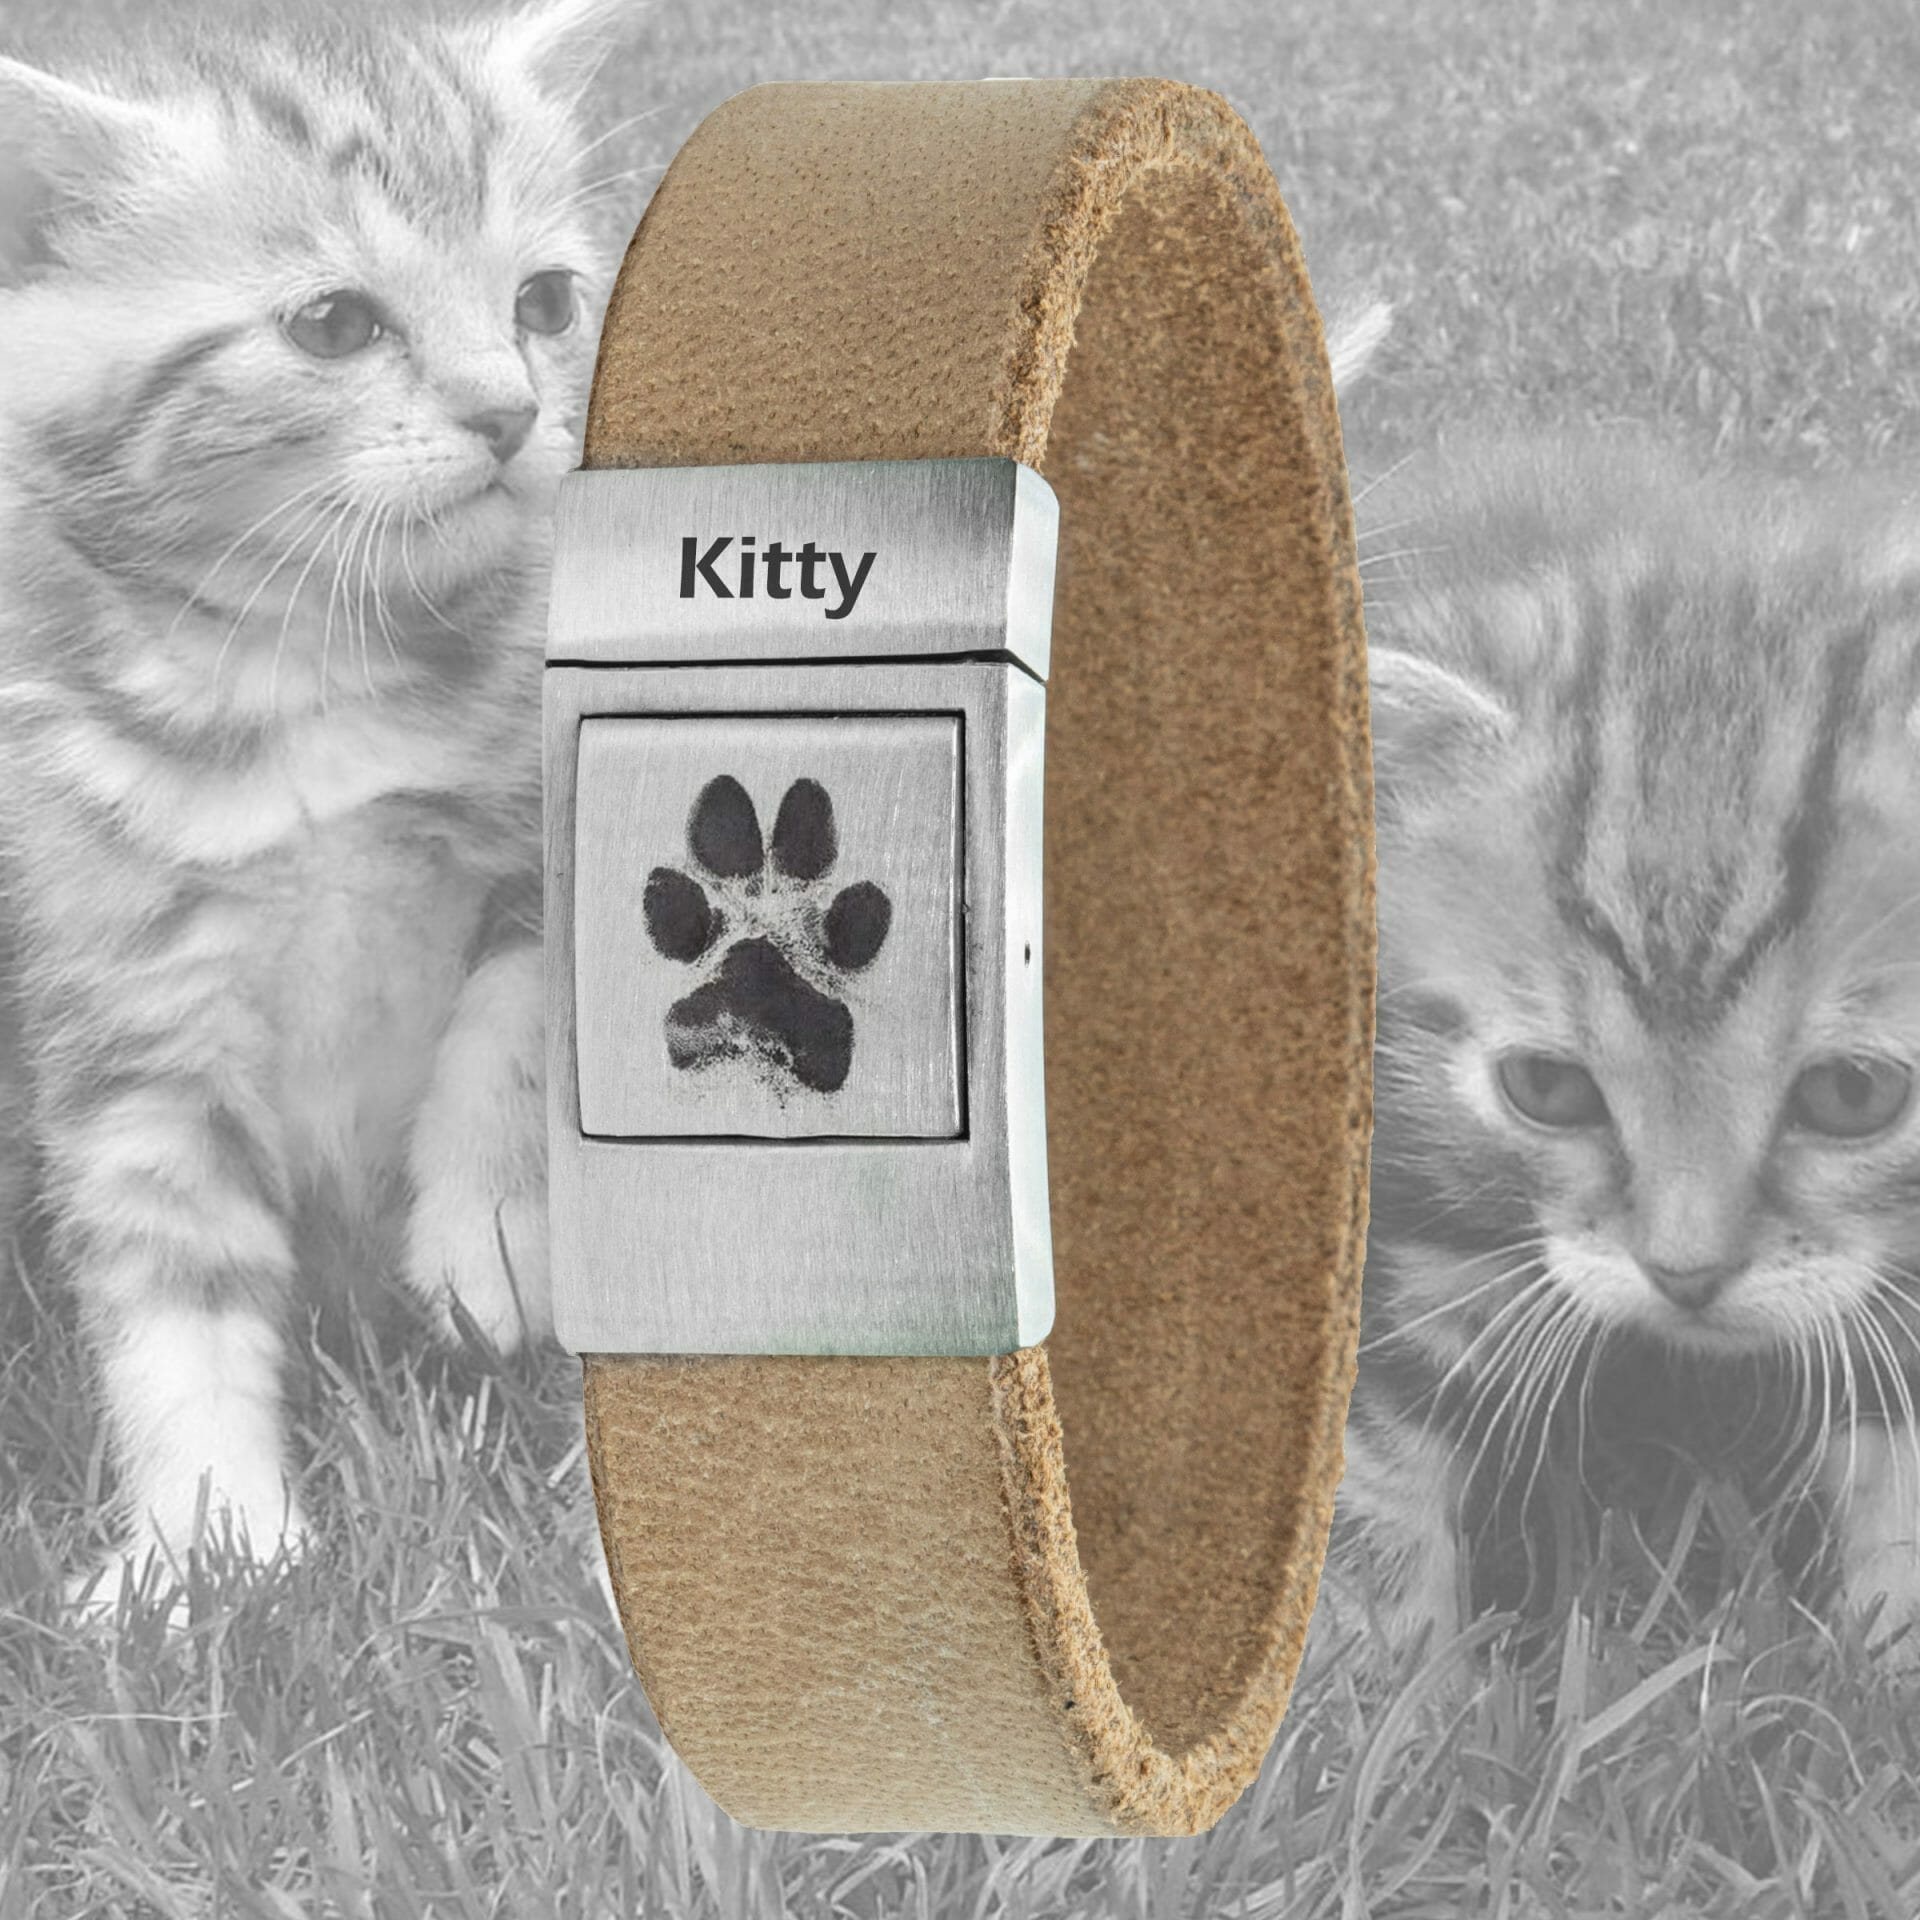 Own cat paw print on leather bracelet of your choice